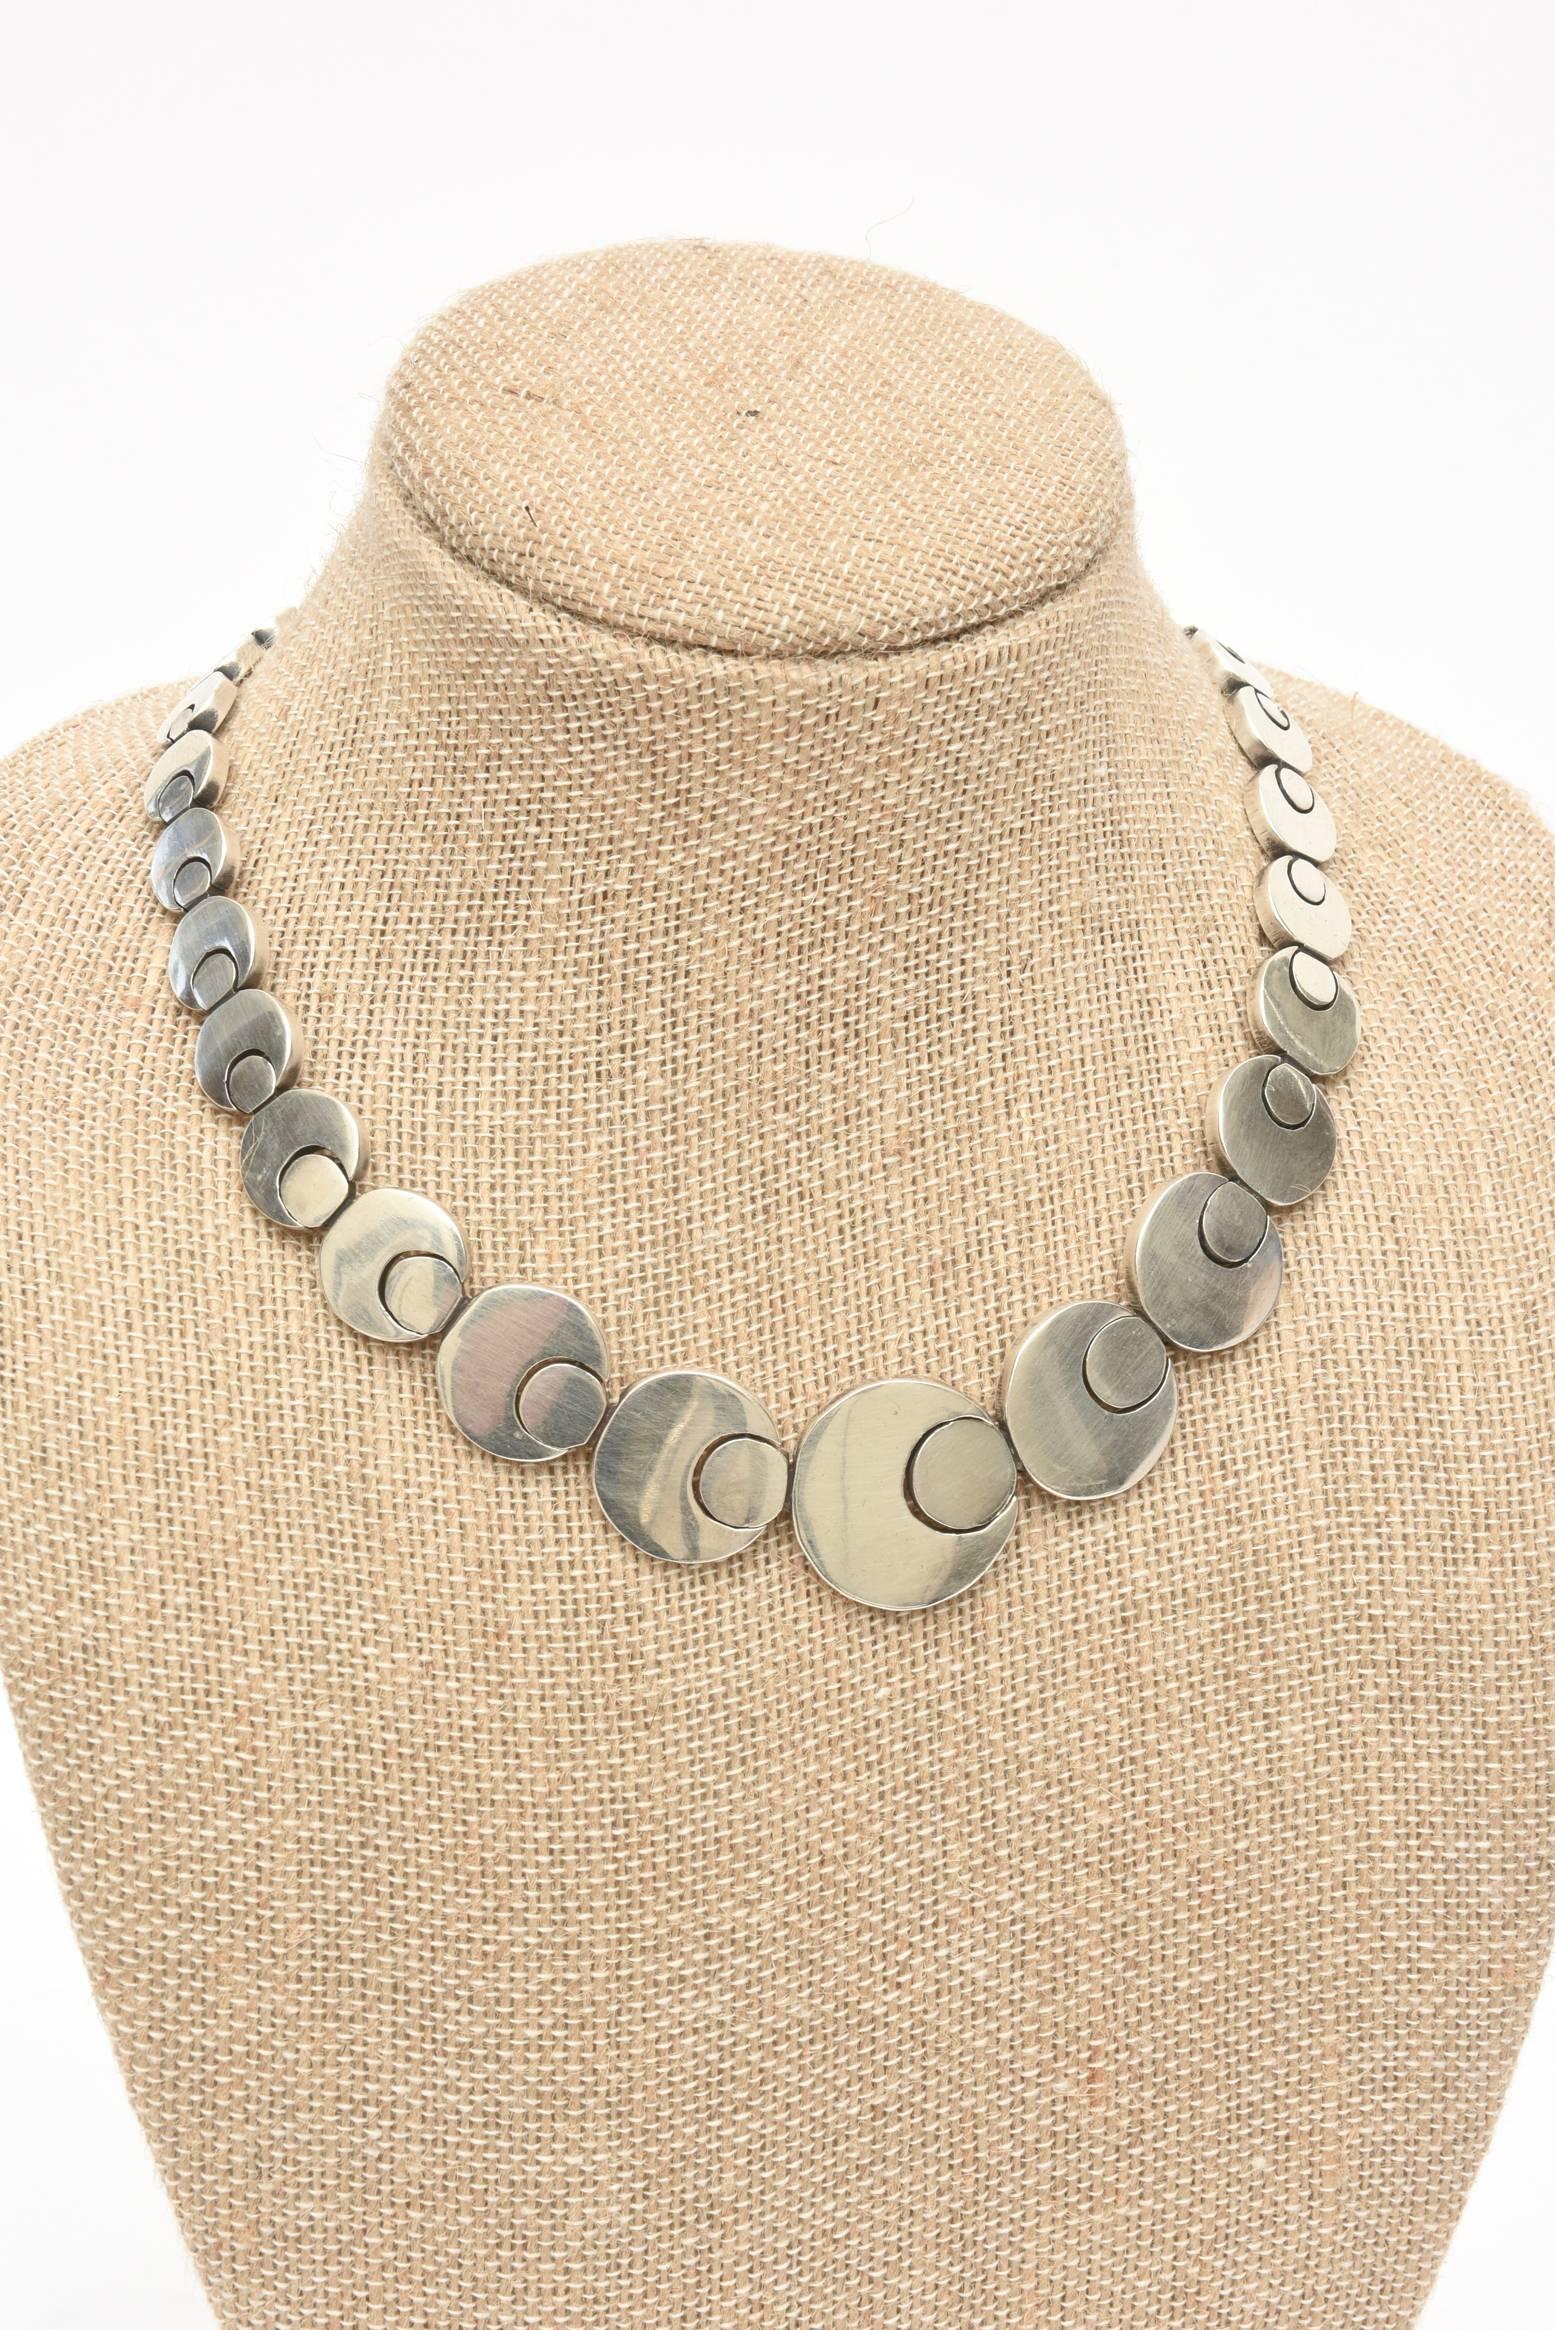 Stering Silver Hallmarked Geometric Link Necklace Vintage For Sale 1